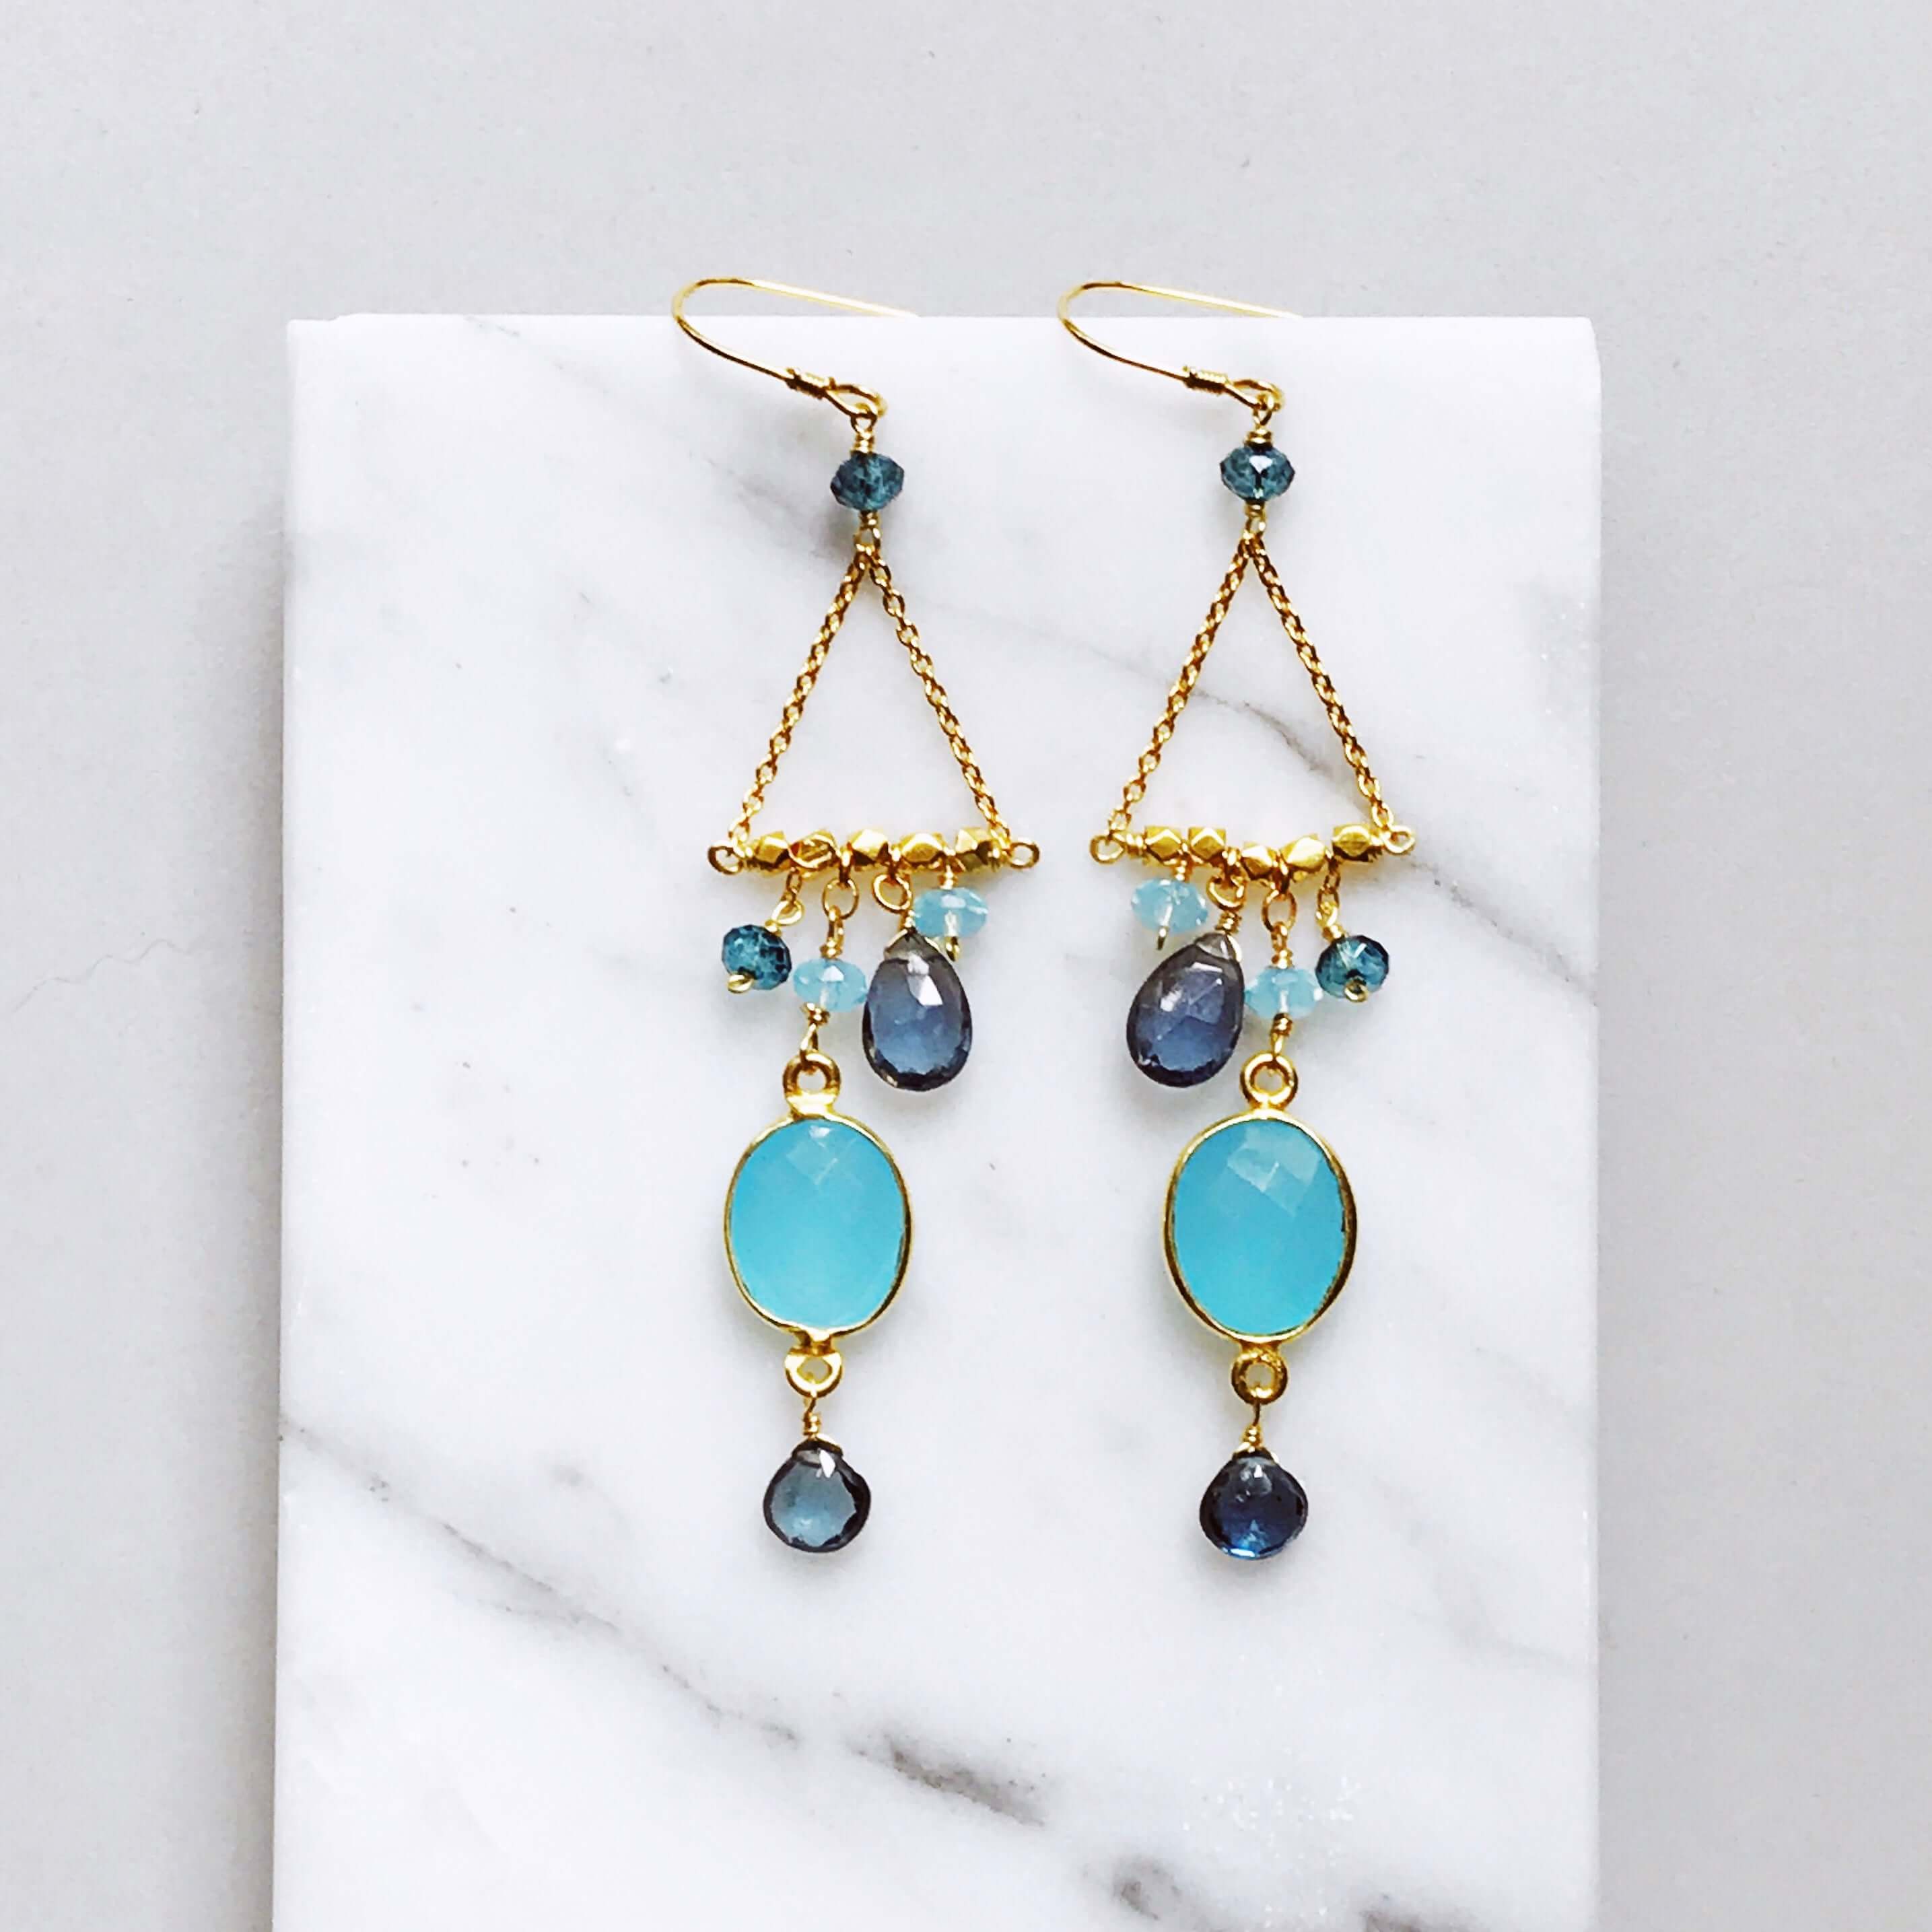 Bezel set blue chalcedony gemstones surrounded by faceted London Blue quartz accent stones Gold Earrings